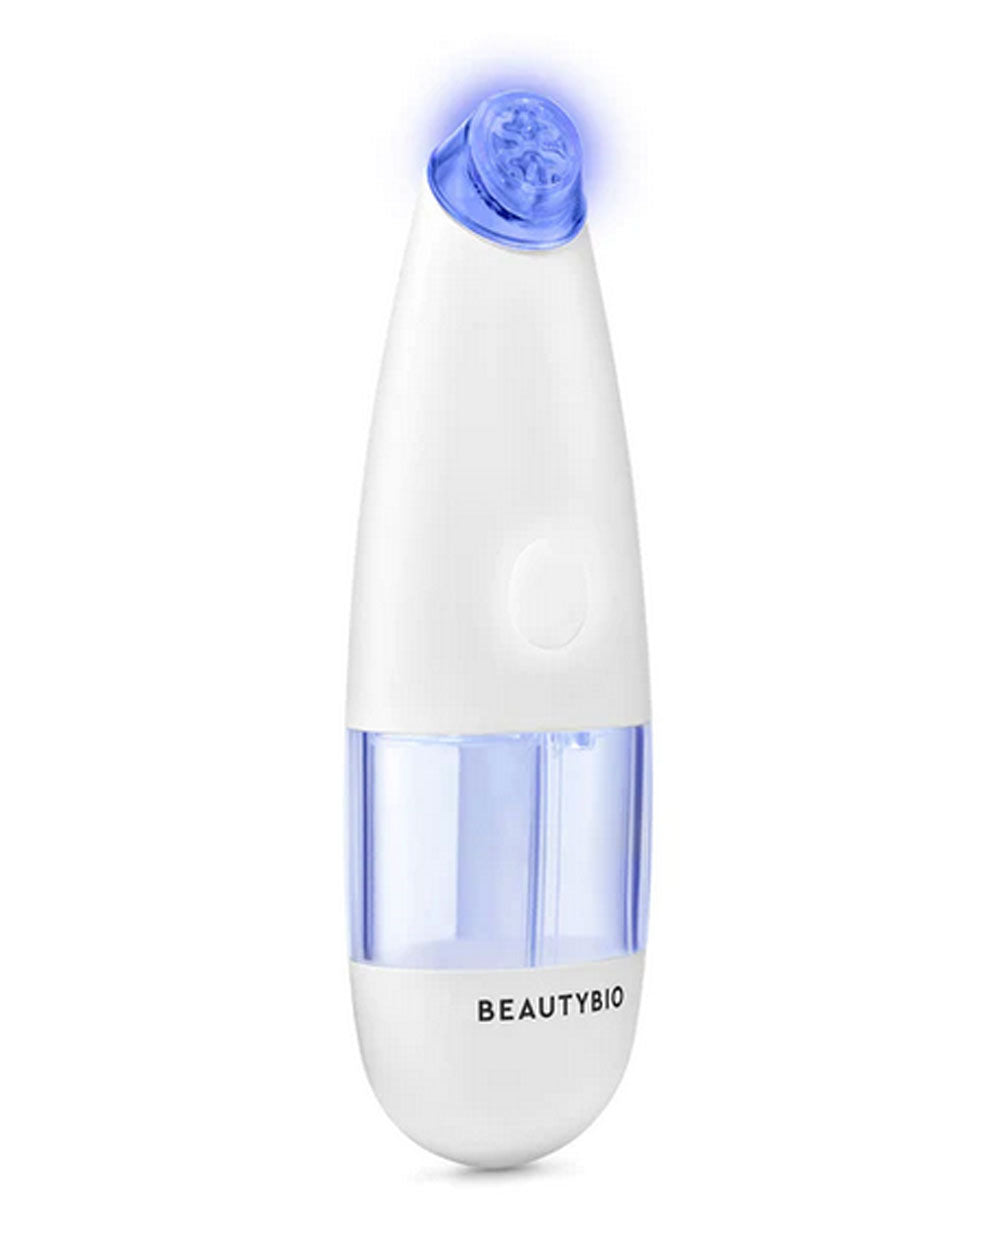 GloFacial Hydration Facial Pore Cleansing Tool with Blue LED